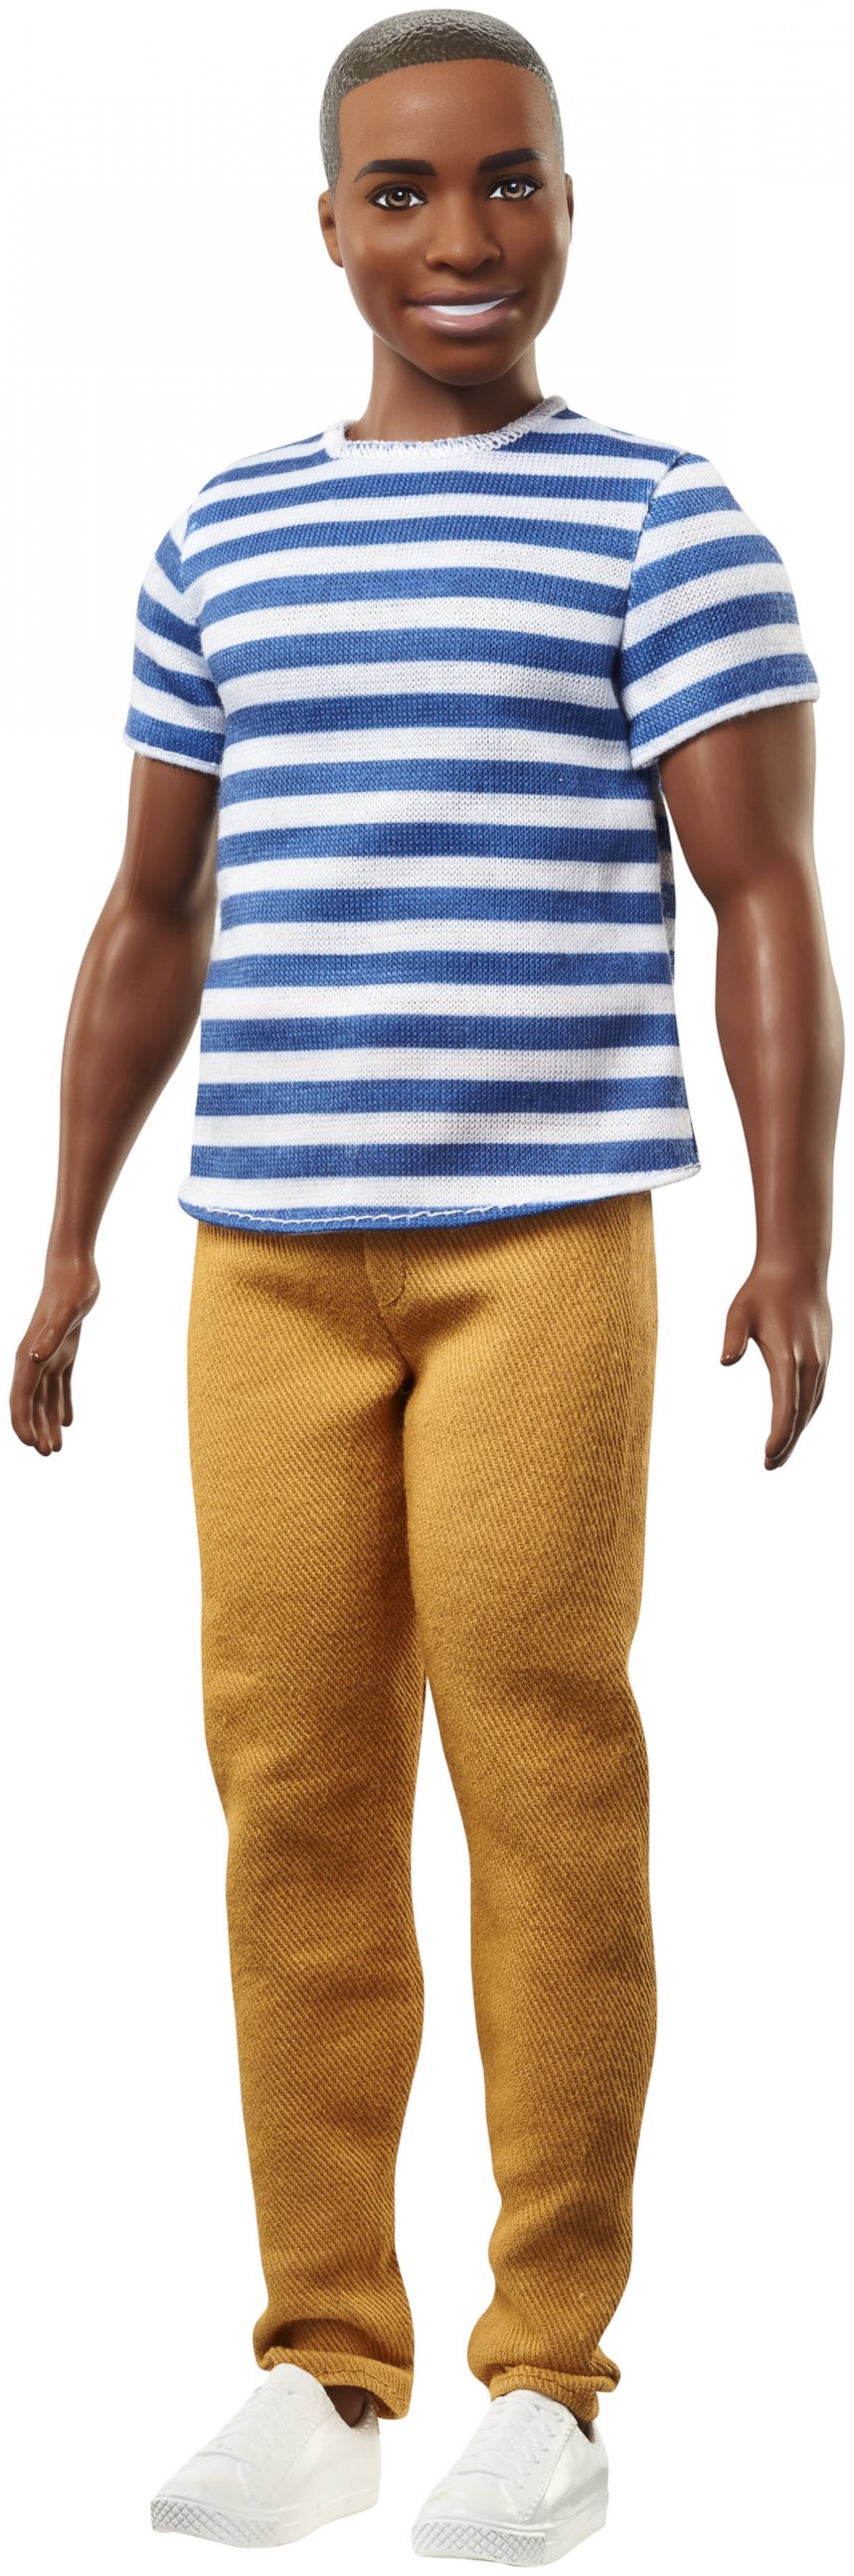 PHOTO: One of the 15 new Ken dolls released by Mattel.